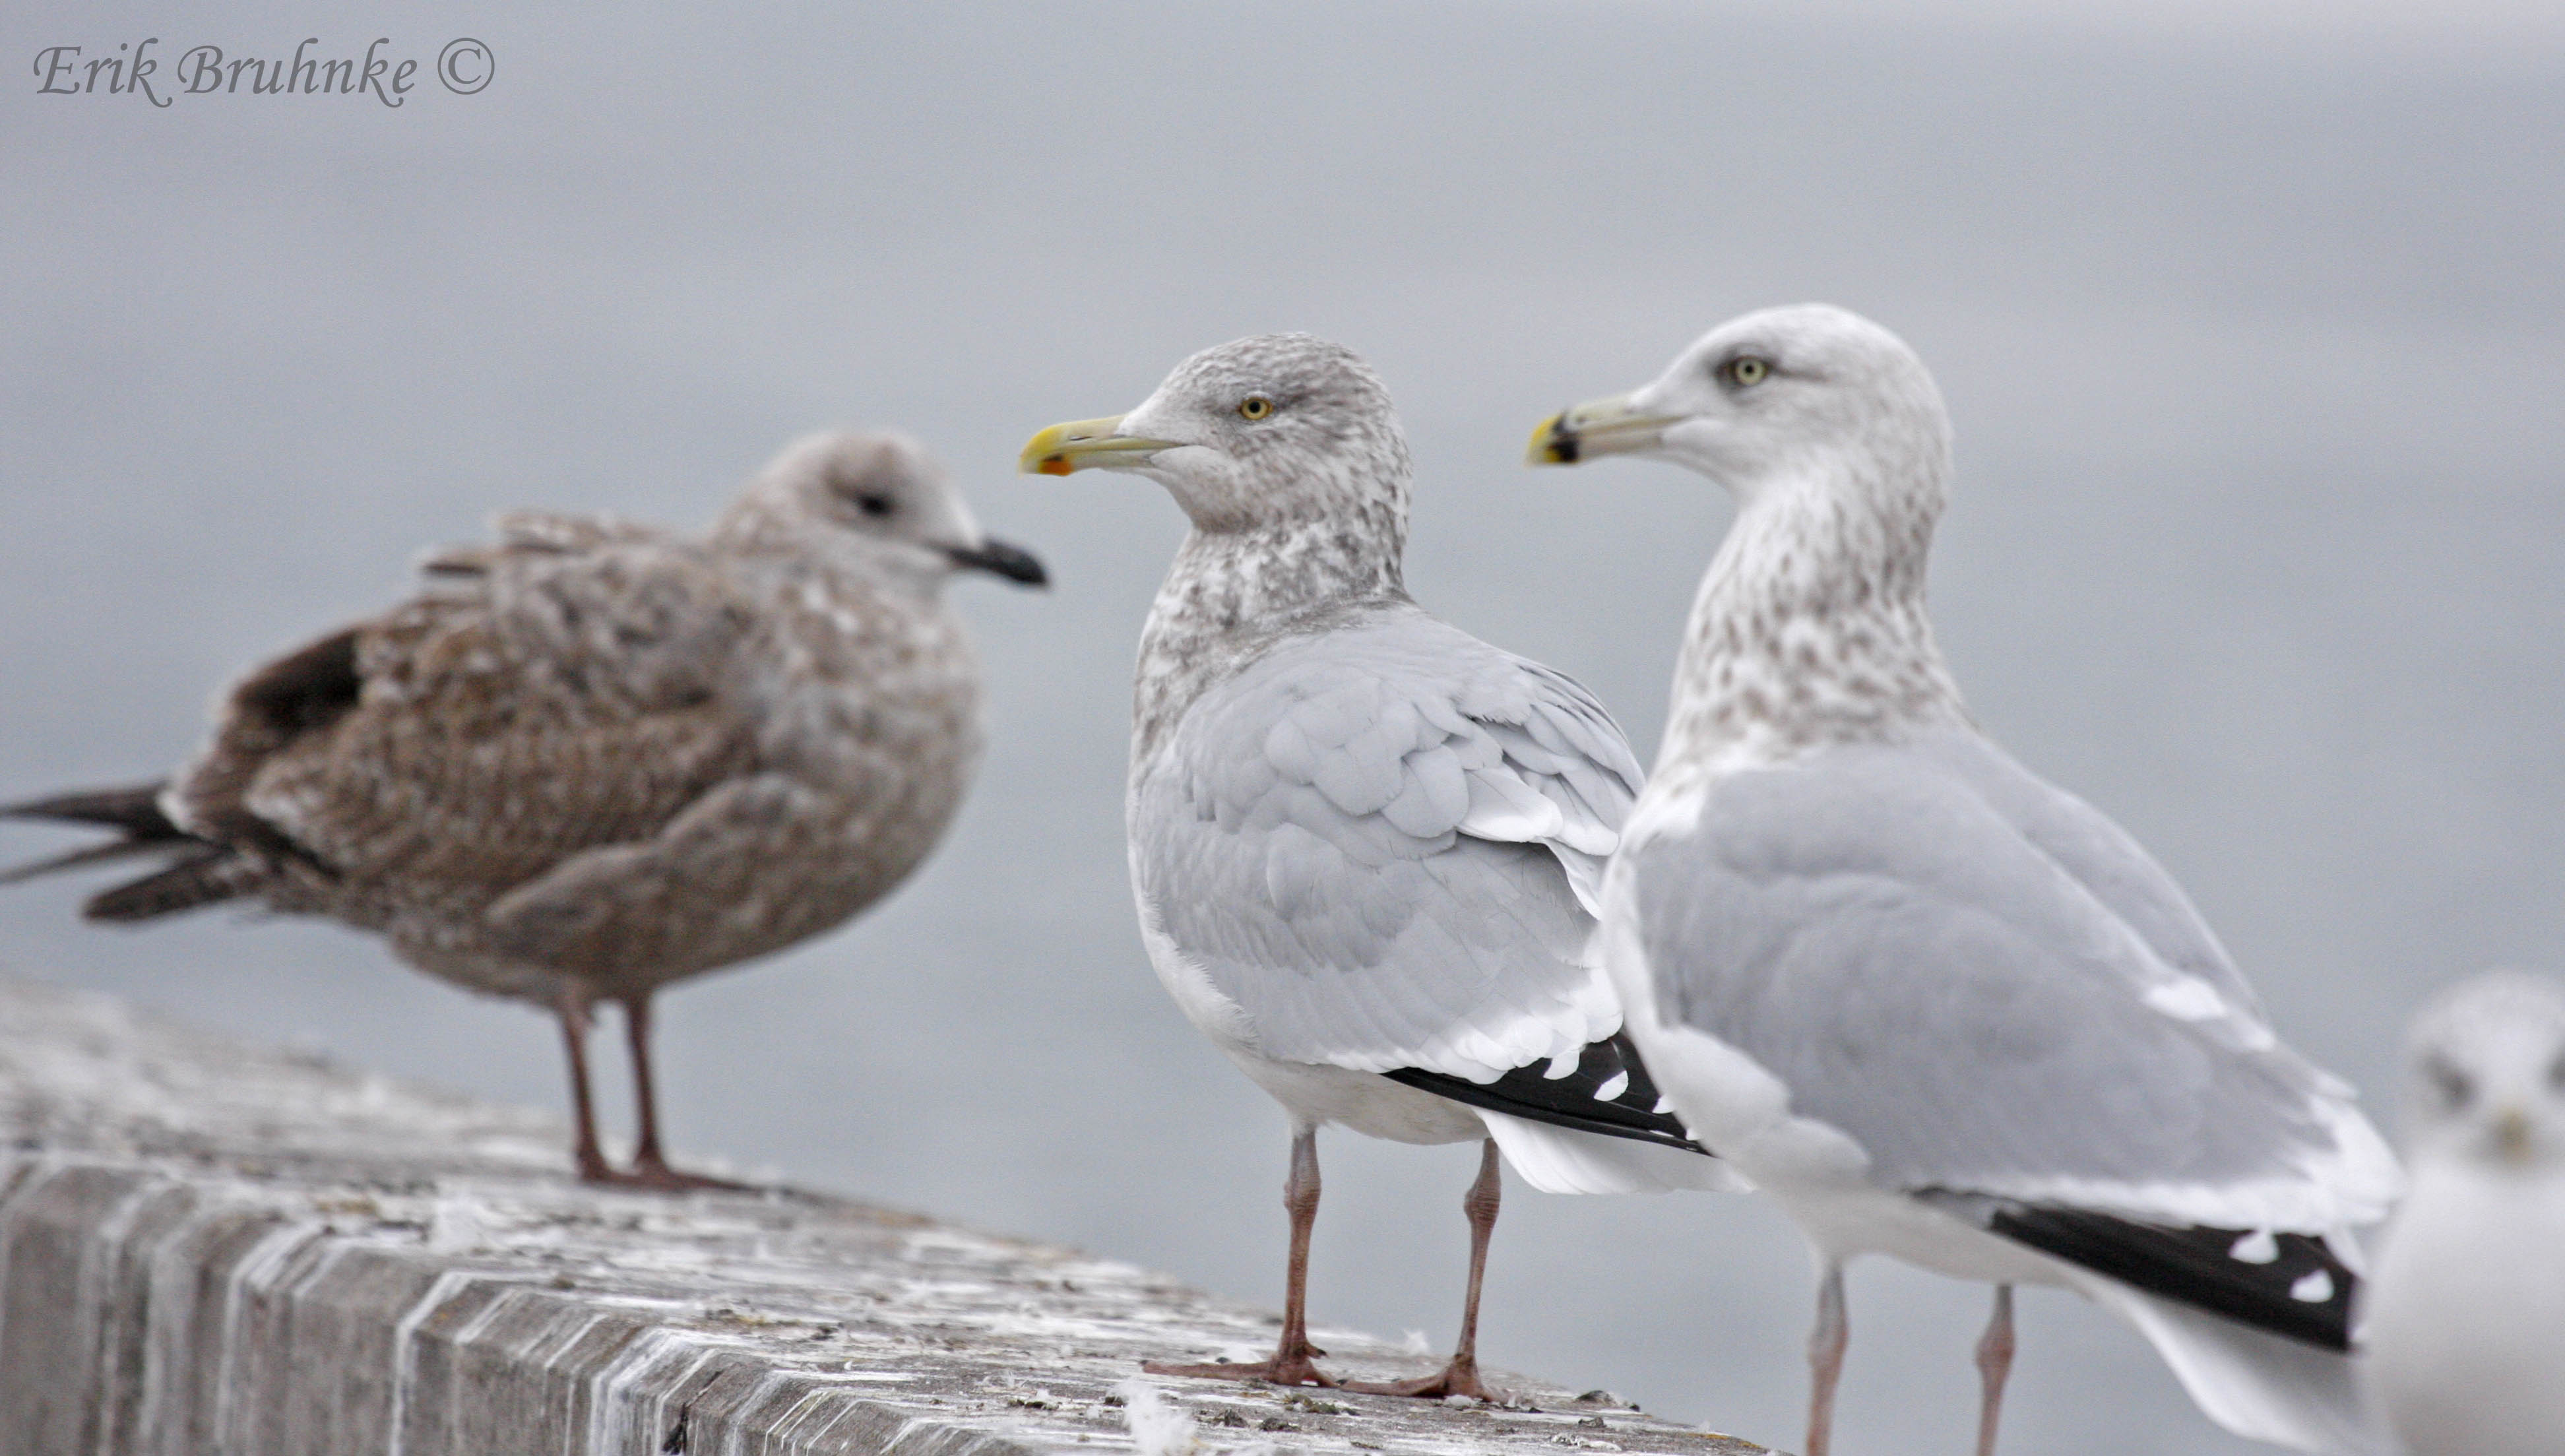 From left to right... Juvenile Herring Gull, Adult Herring Gull, 3rd cycle Herring Gull, Ring-billed Gull